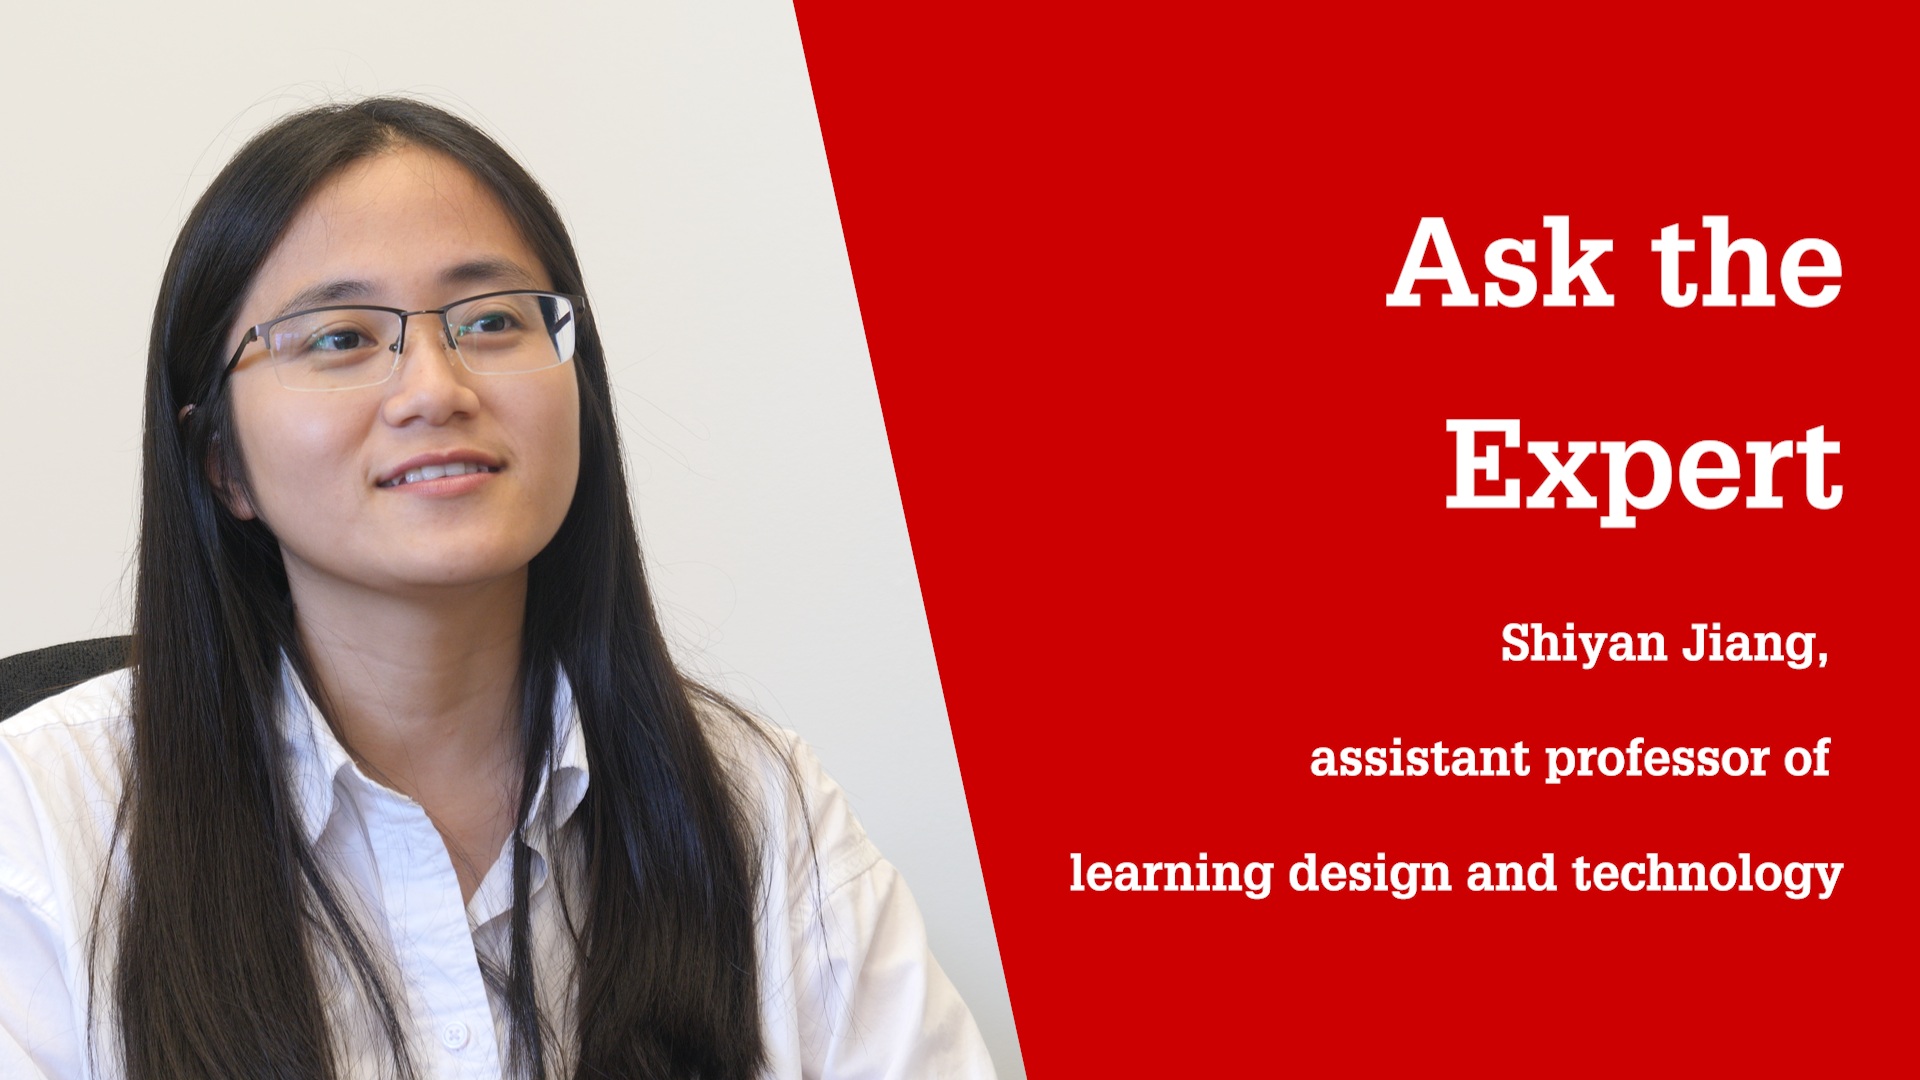 NC State College of Education Assistant Professor Shiyan Jiang discusses artificial intelligence